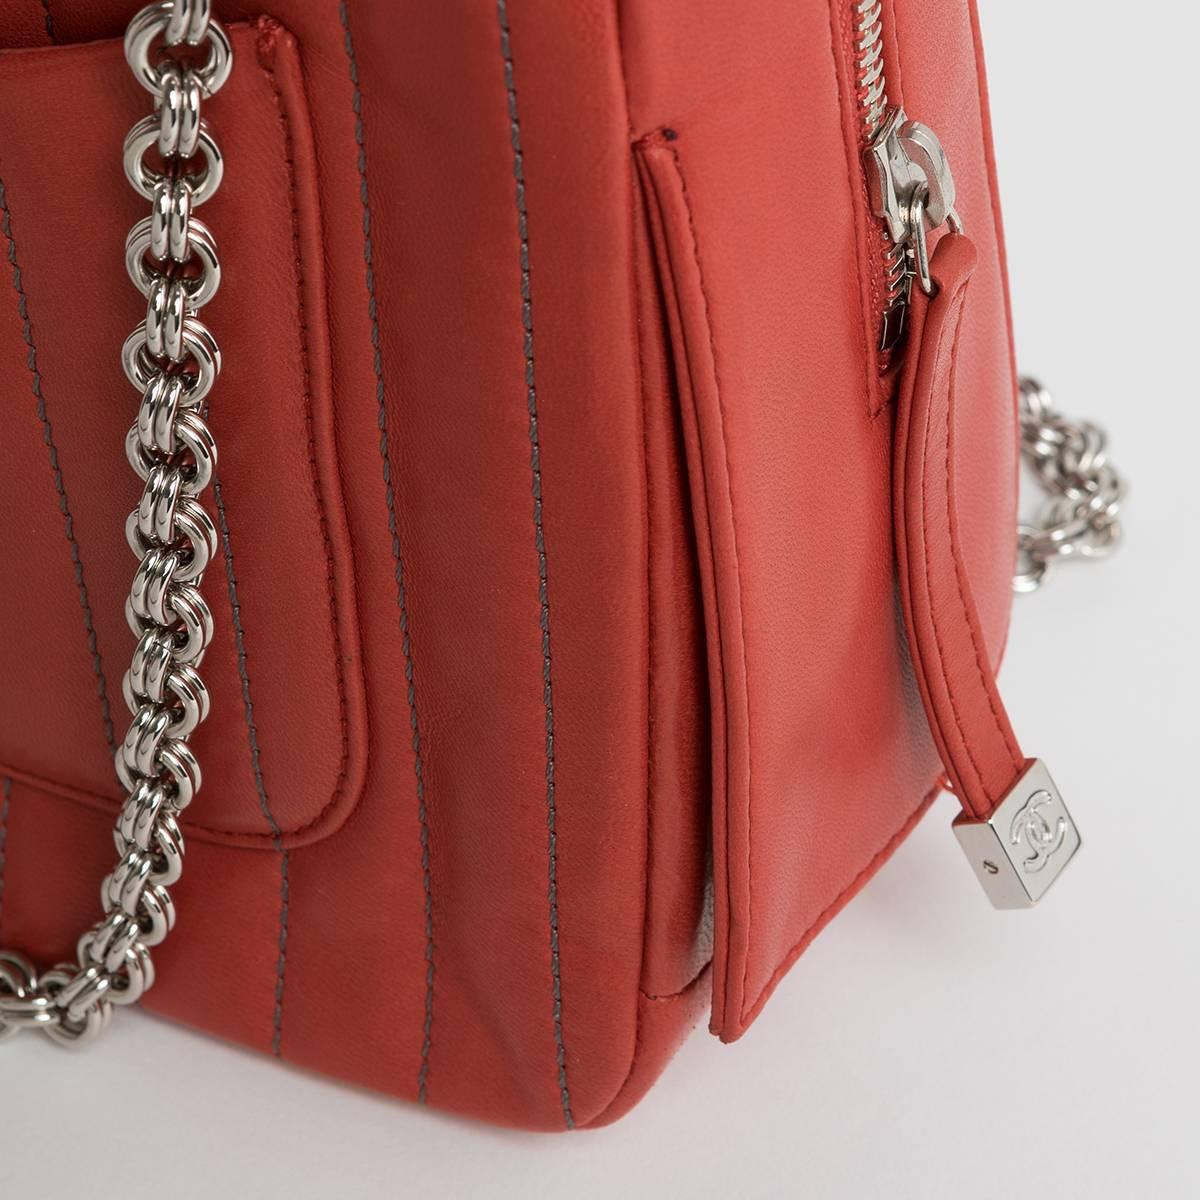 Chanel Geranium Red Lambskin Two Chain Handles Shopping Bag With Side Pockets For Sale 5